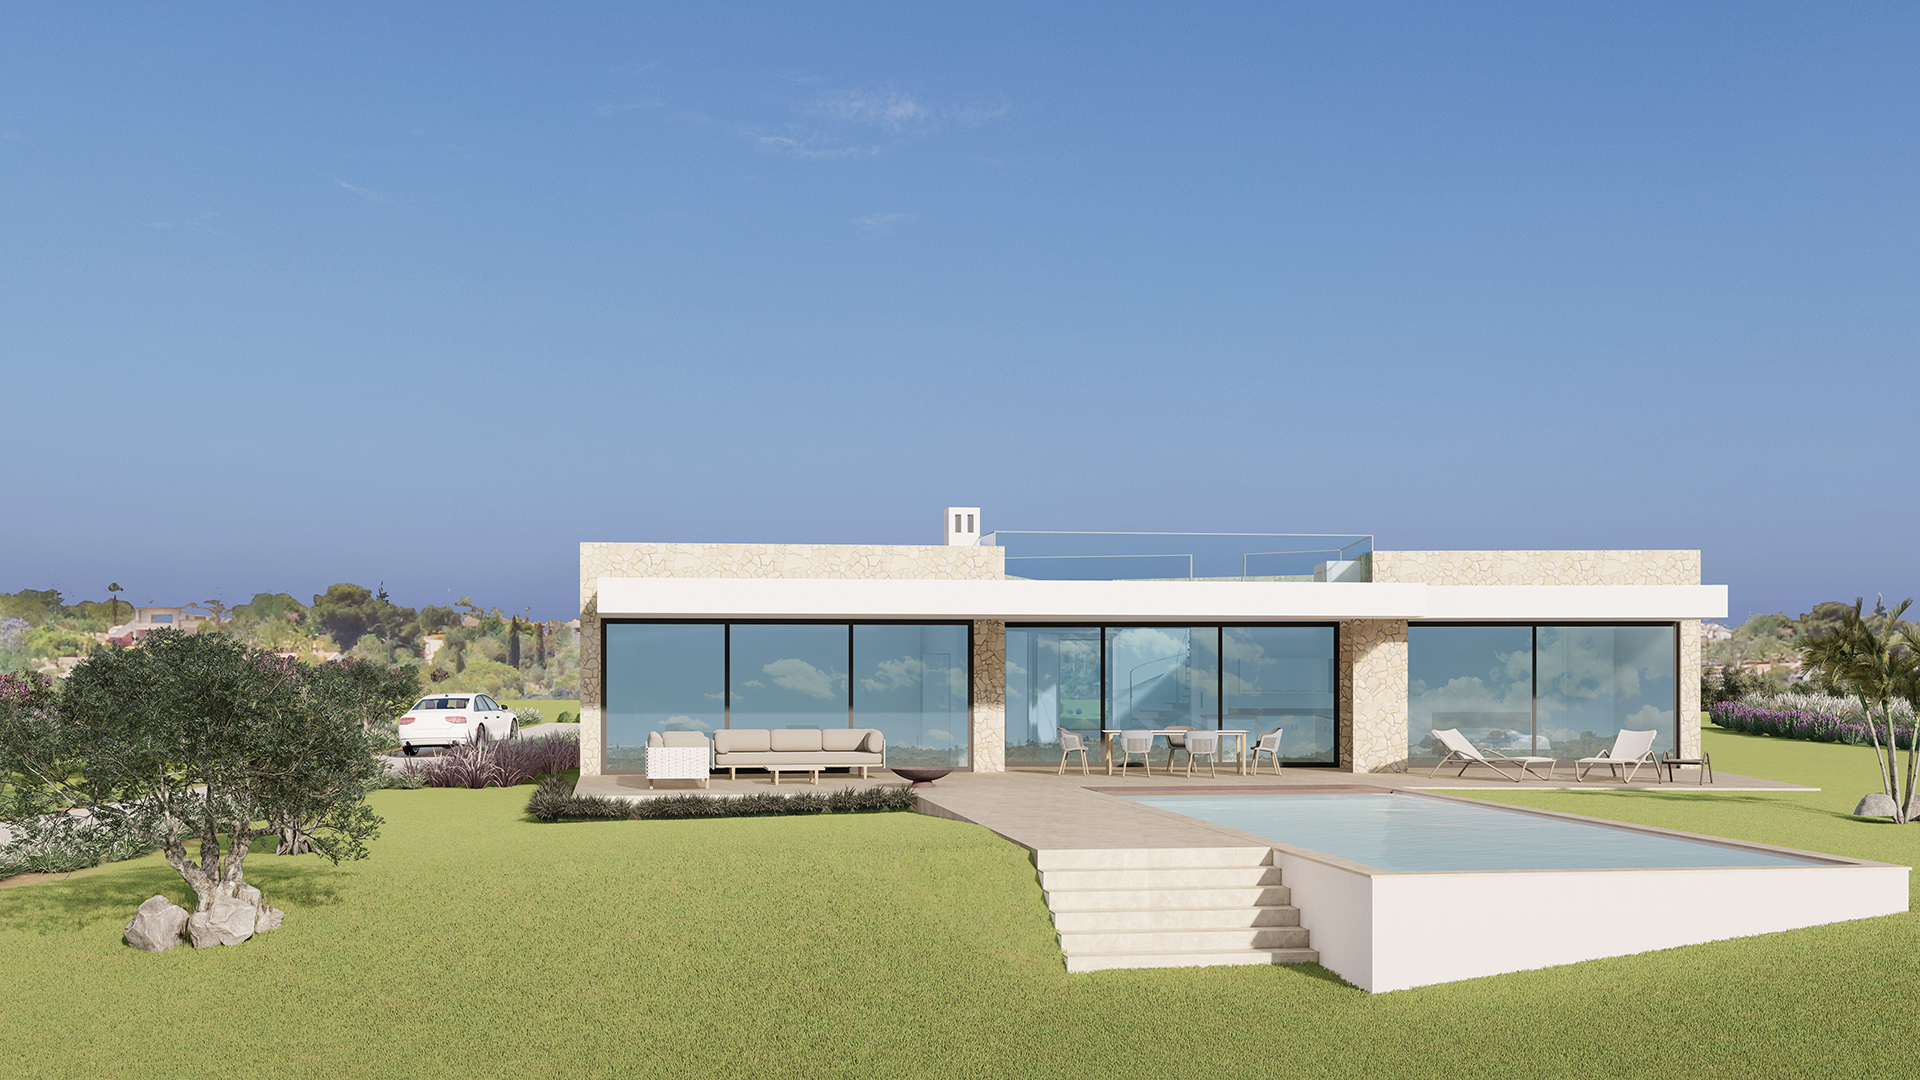 UNDER CONSTRUCTION - 6 Bedroom contemporary villa with pool and sea views, near Lagos | LG1965 A new contemporary 6 bedroom villa with large pool and garage on a generous plot of 3015m². Construction is scheduled to start in the 4th quarter of 2022. It is one of 7 projects (plot and construction) in a very popular residential area near Lagos. Located in a prime position with sea and panoramic views and with 2 minutes of Palmares Golf Course and Meia Praia beach.
